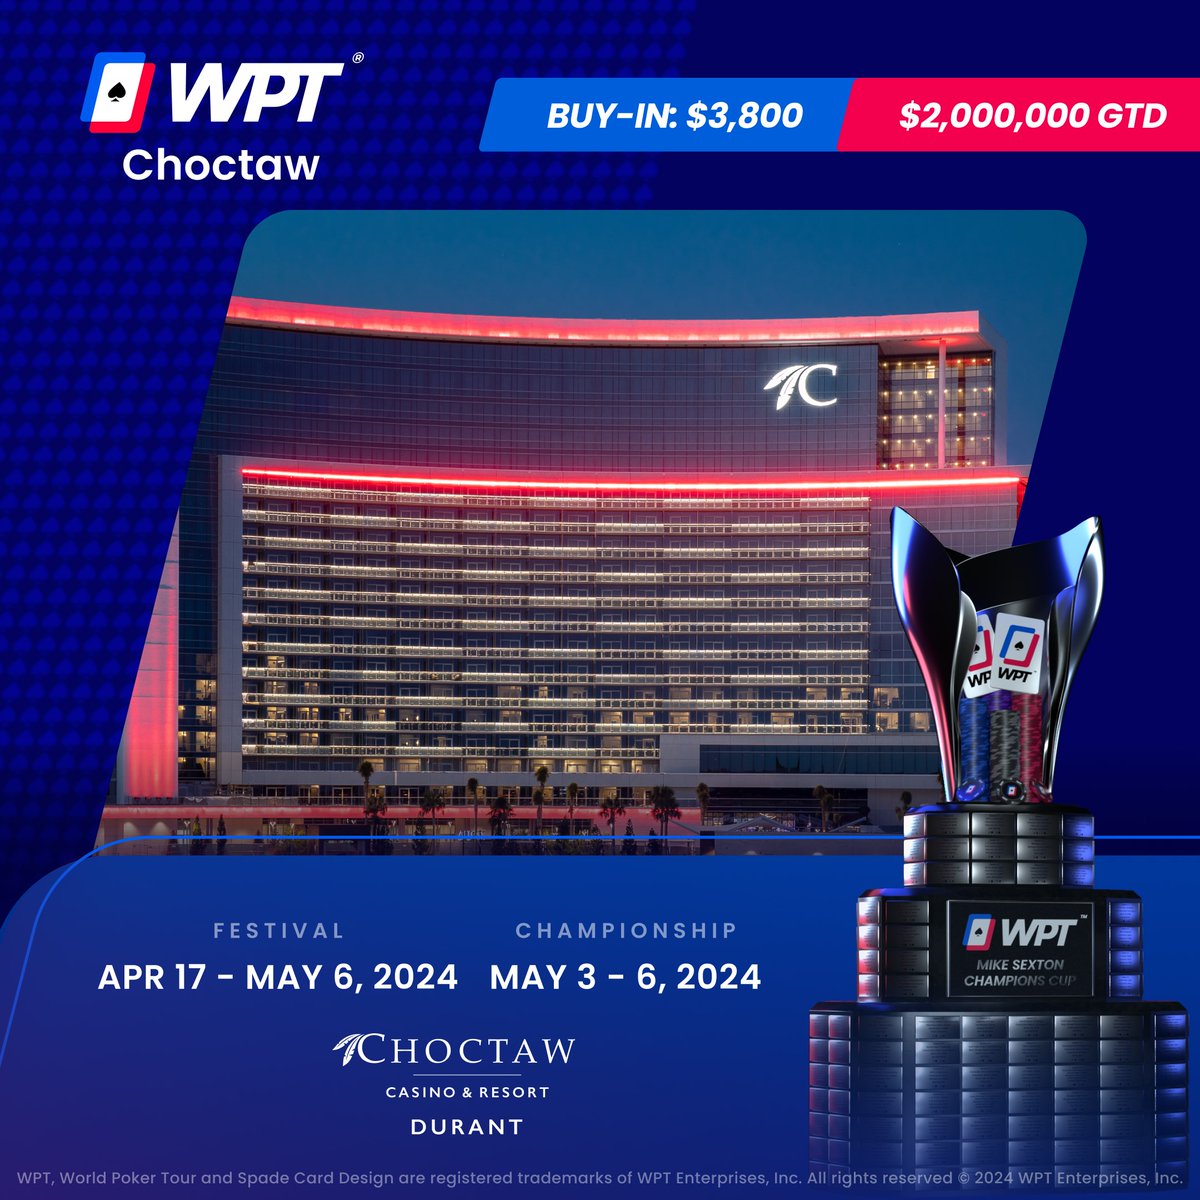 Our #WPTChoctaw Festival kicks off next week and features a $3,800 WPT Choctaw Championship $2,000,000 GTD beginning May 3! 🏆 Book your stay now @ChoctawDurant for preferred room rates as low as $119/night using code 'WPT24' at checkout! More Info: wpt.co/WPTChoctawInfo…